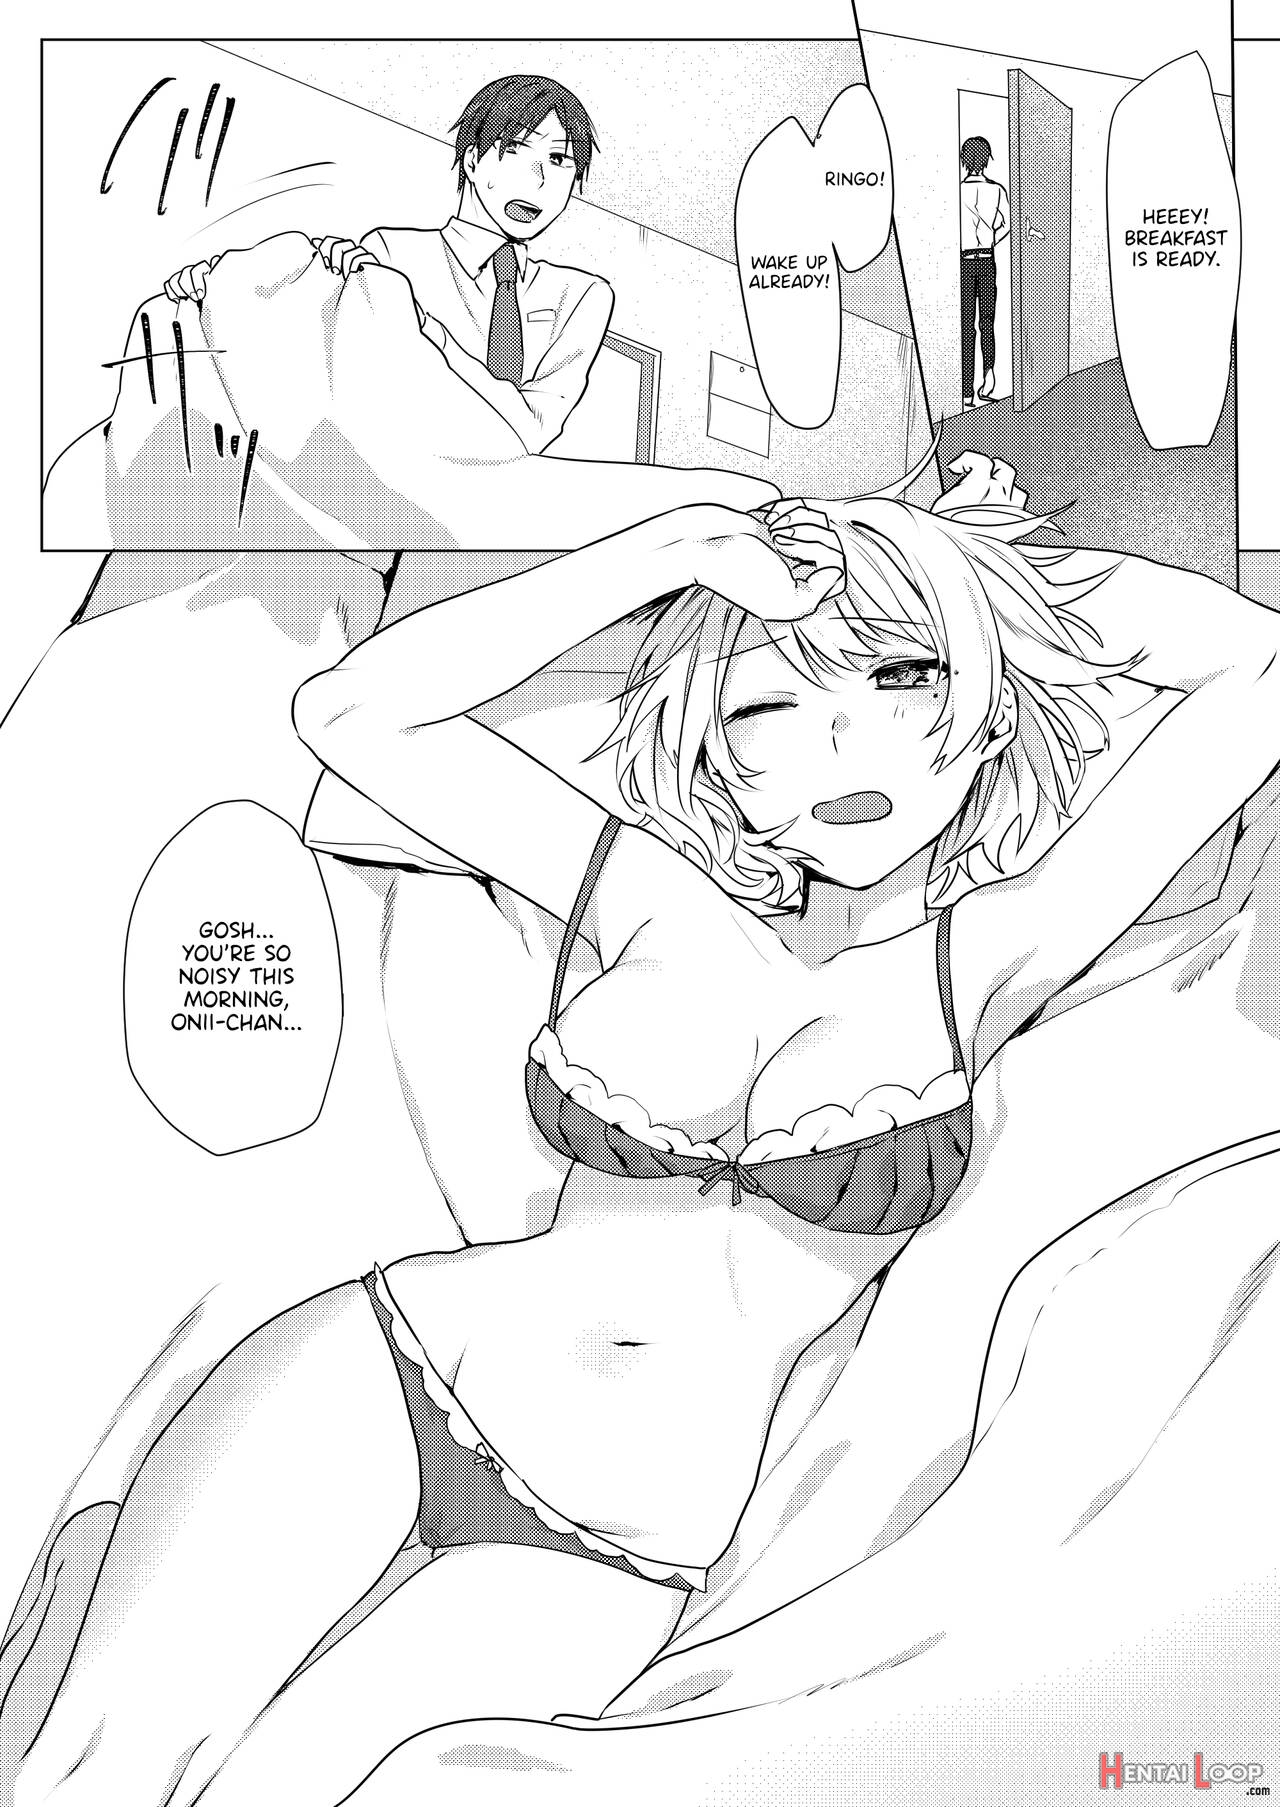 A Plan To Seduce My Onii-chan page 2